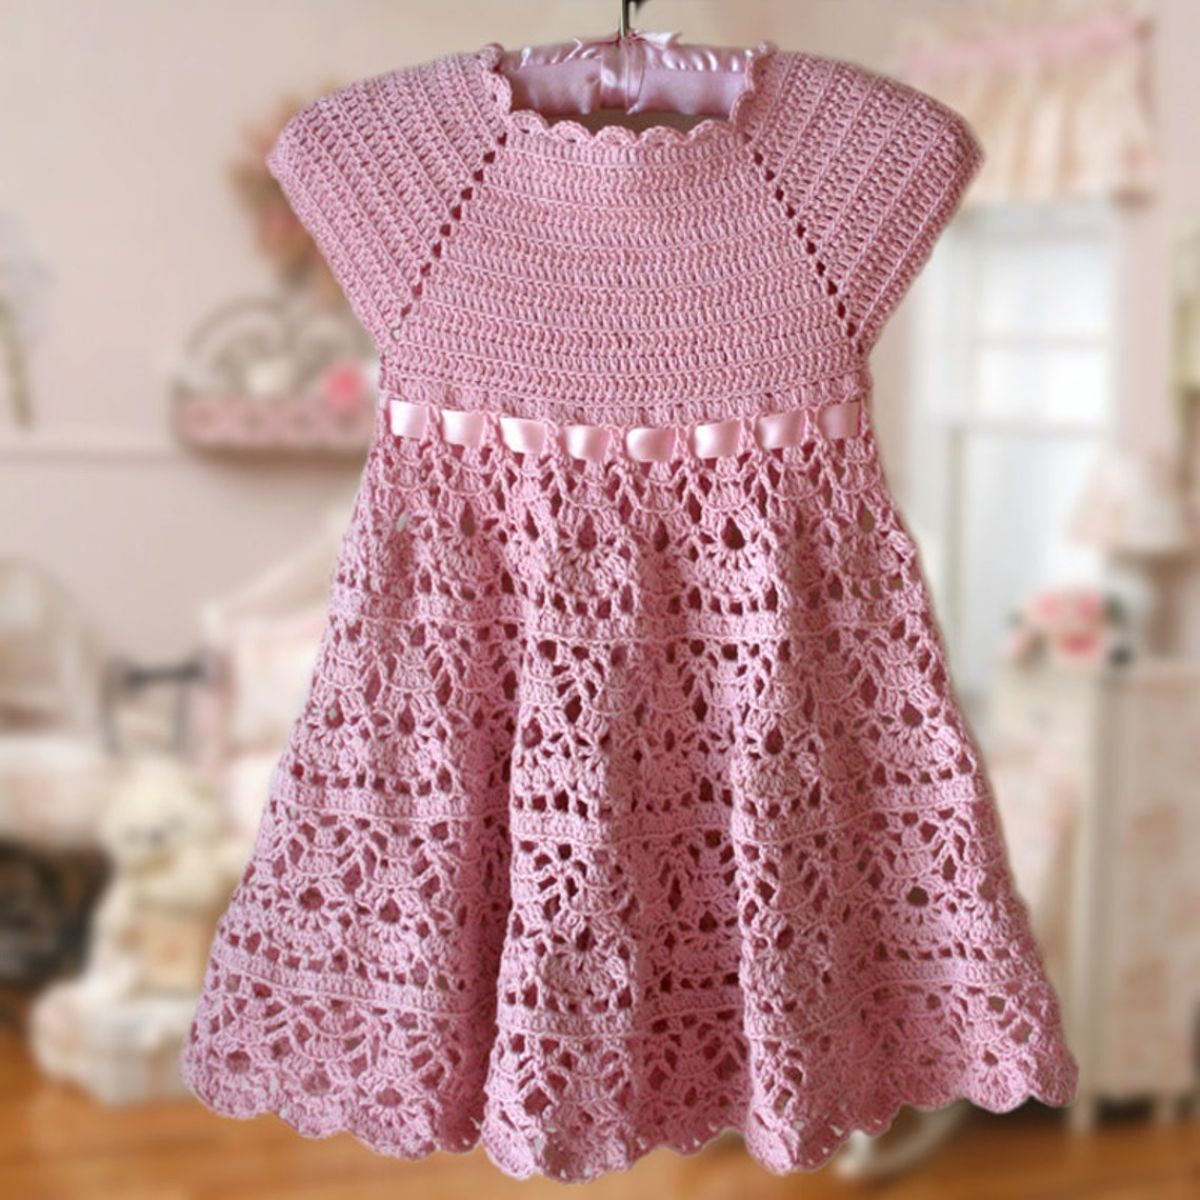 Pink crochet baby dress with a scallop neckline, short sleeves, and a lace style full skirt.